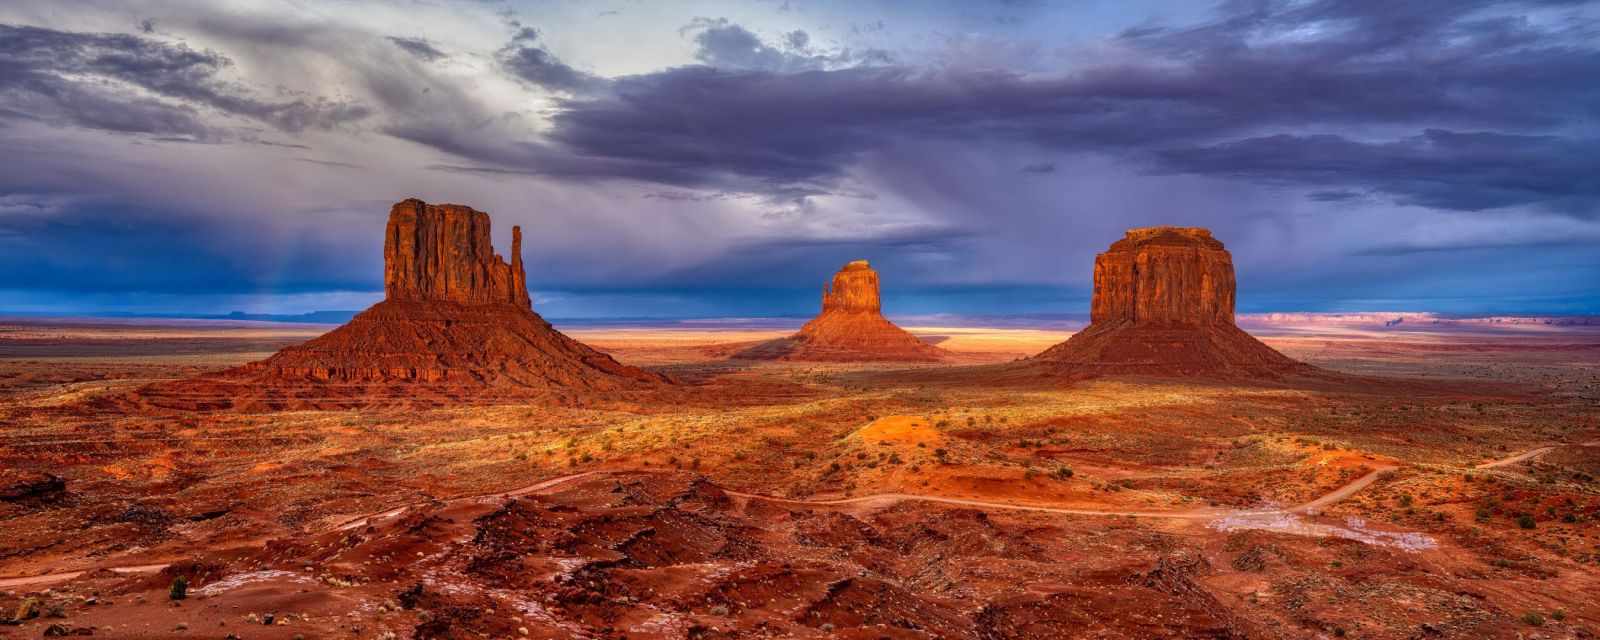 Monument Valley in Arizona - Best Time and 7 Tips